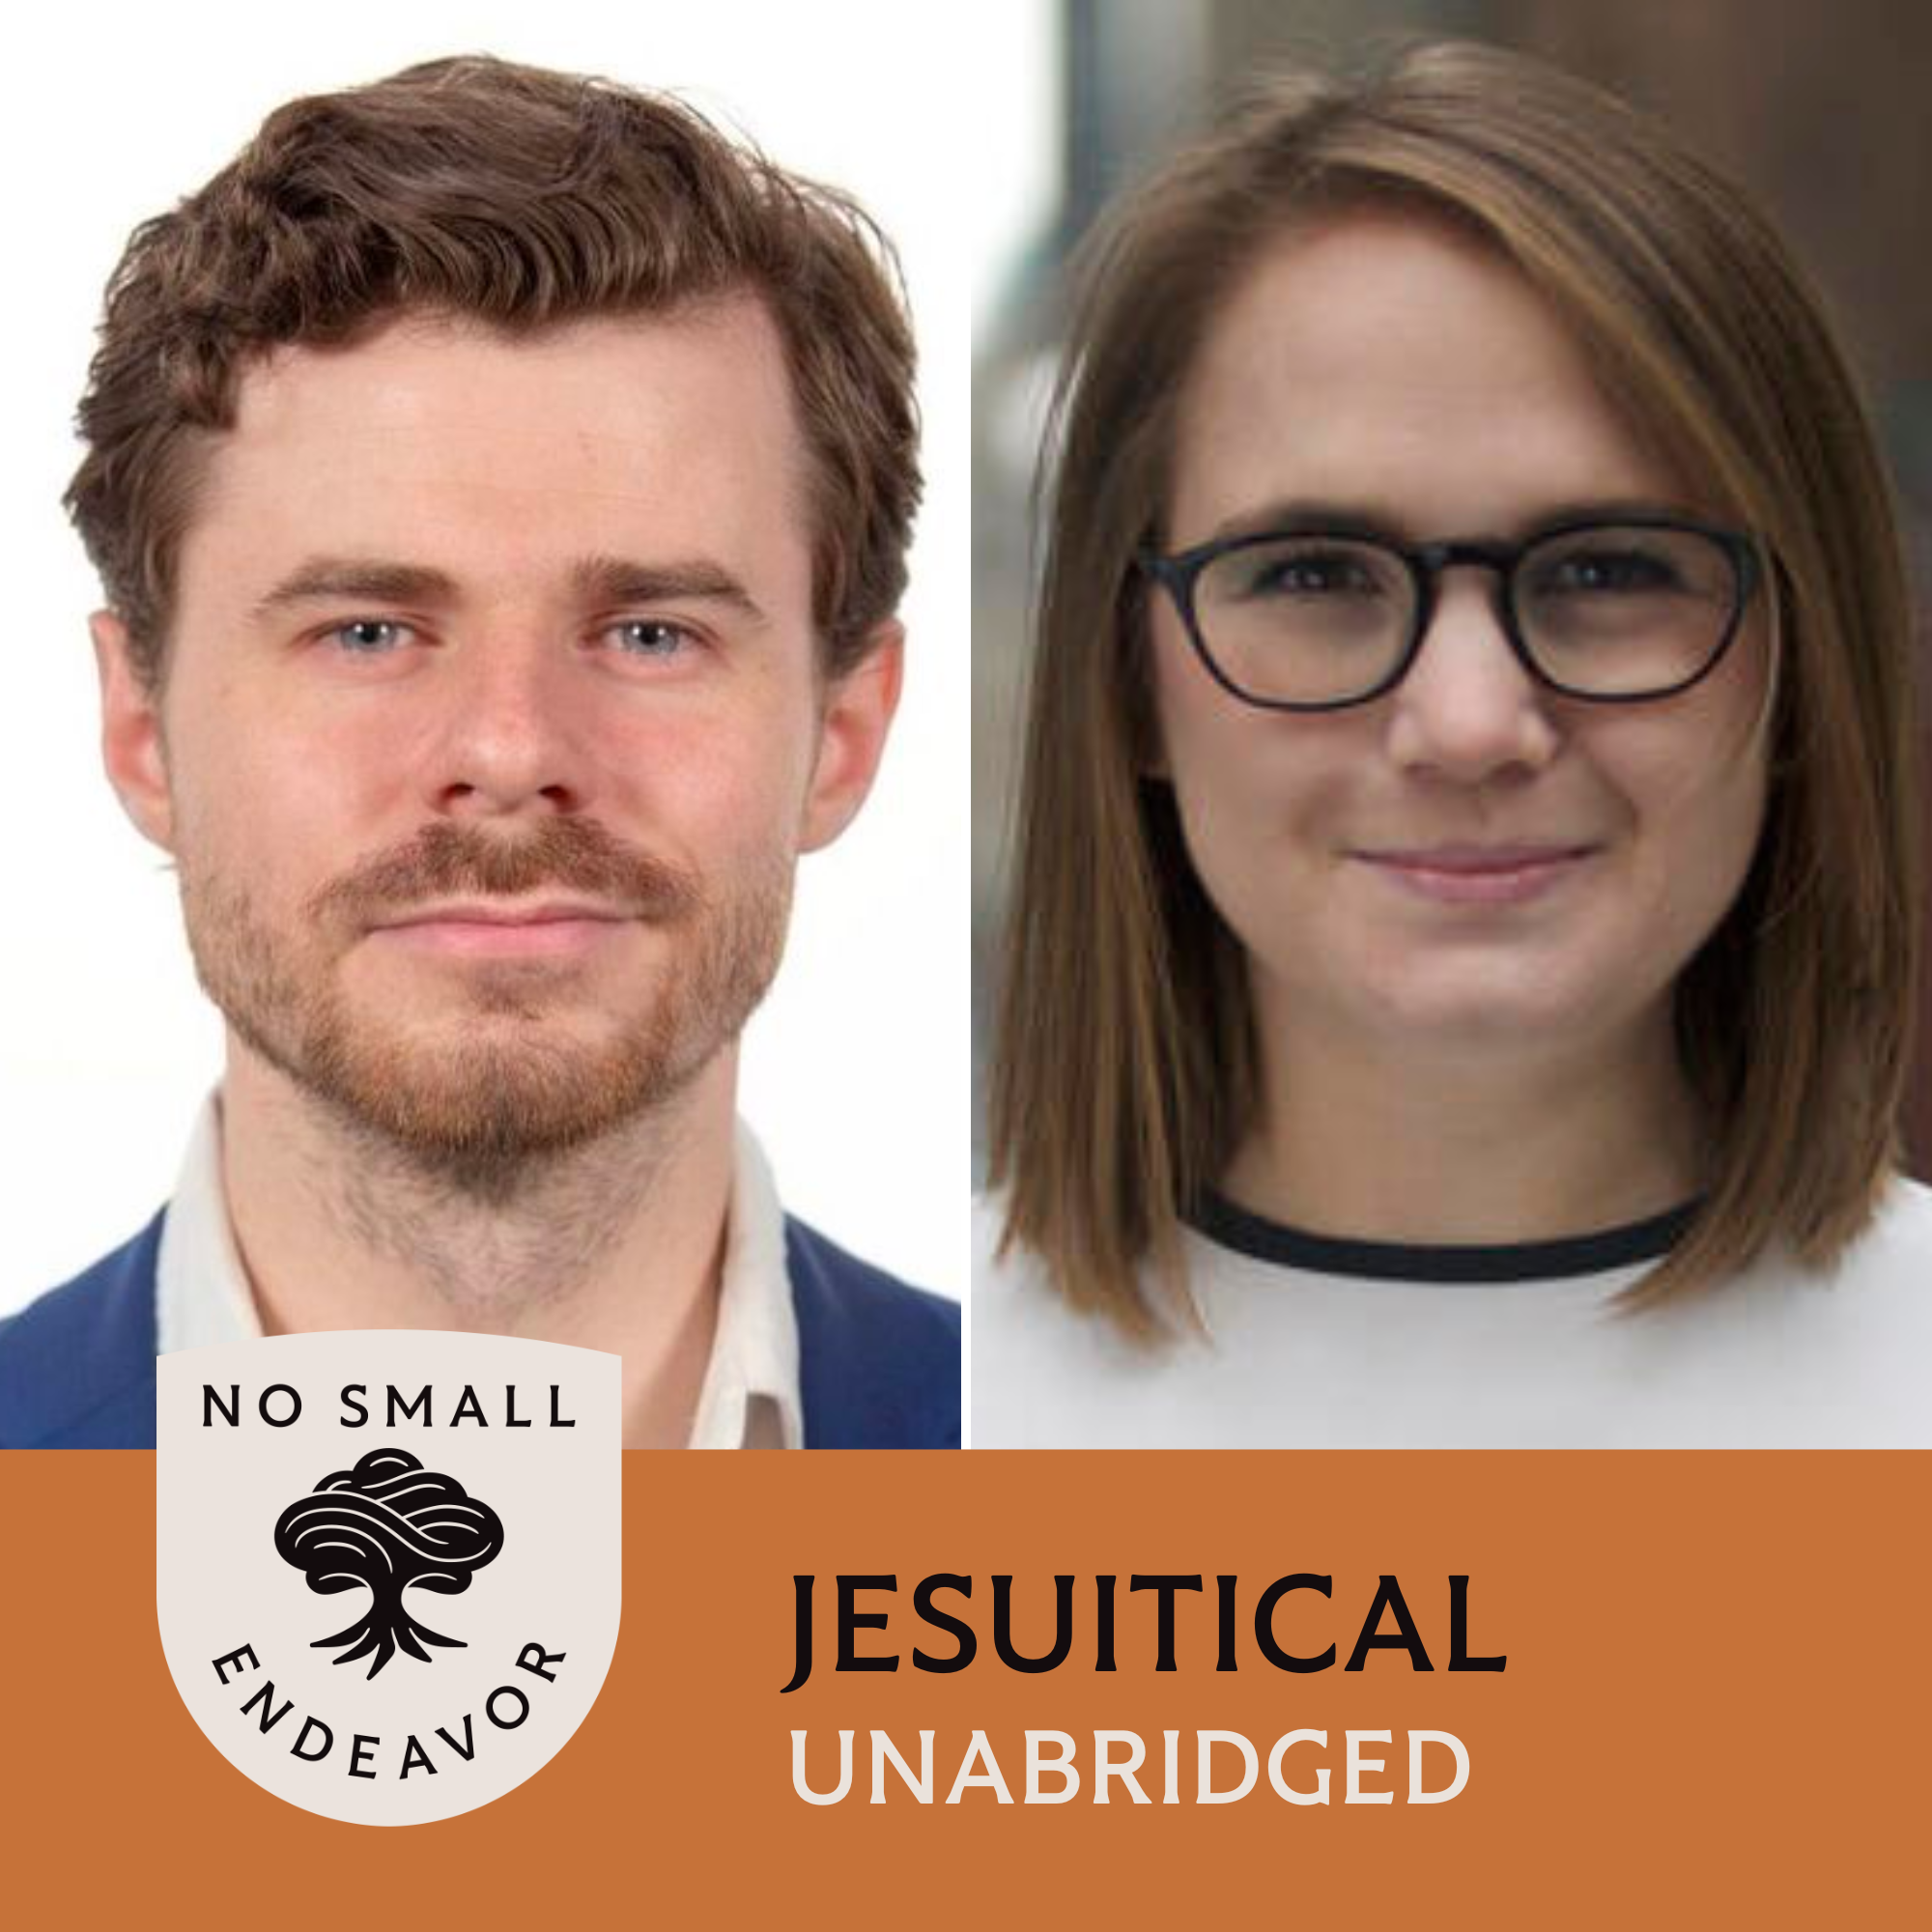 Thumbnail for "128: Unabridged Interview: Jesuitical".